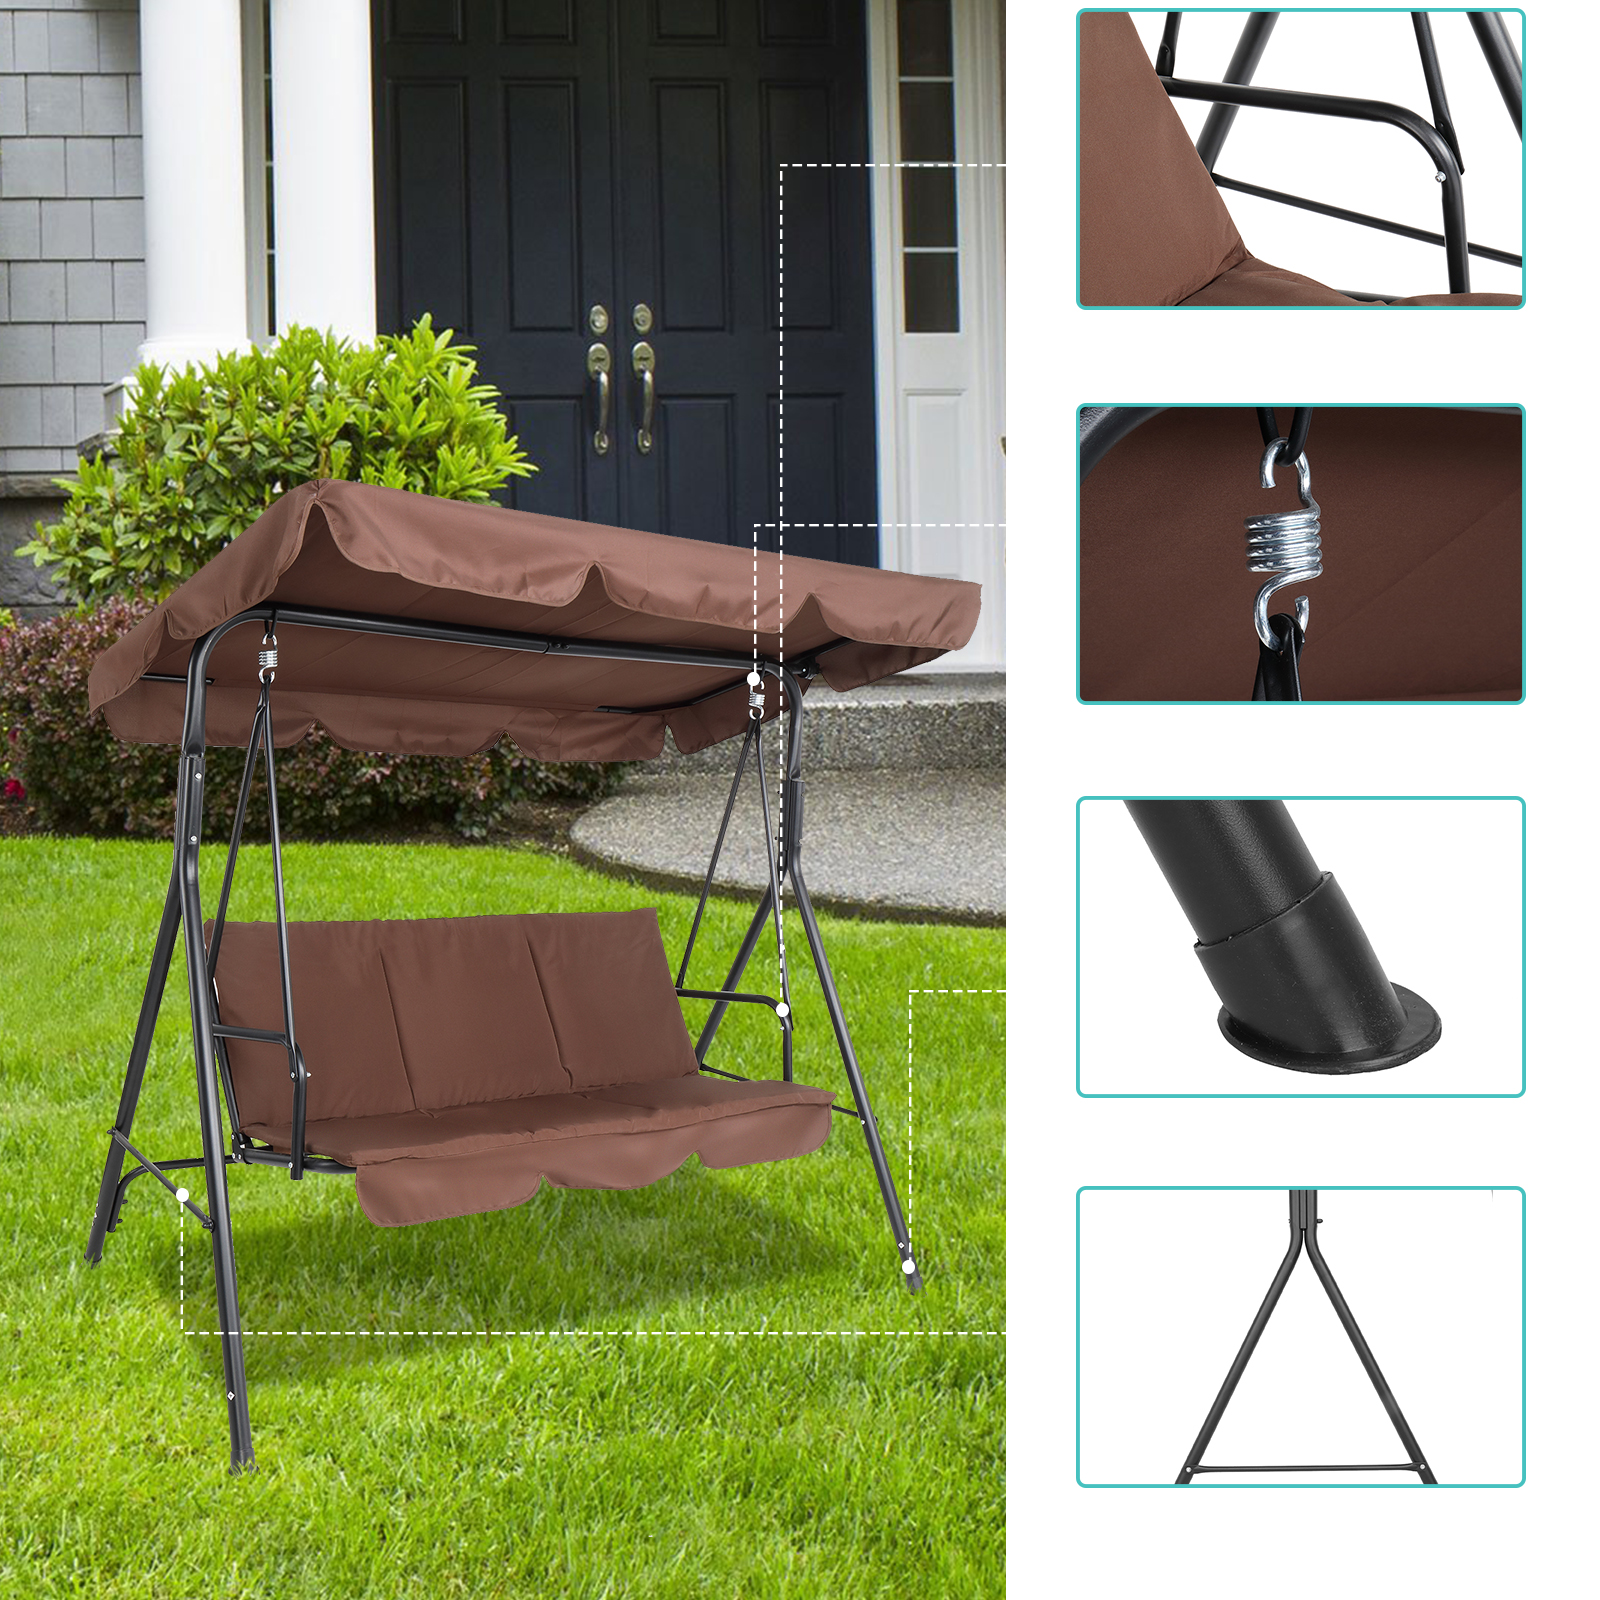 3 Person Outdoor Patio Swing Seat with Adjustable Canopy, All Weather Resistant Hammock Swing Chair W/ Removable Cushions, High Load-Bearing Sunshade Swing for Patio Garden Pool Balcony, T791 - image 5 of 9